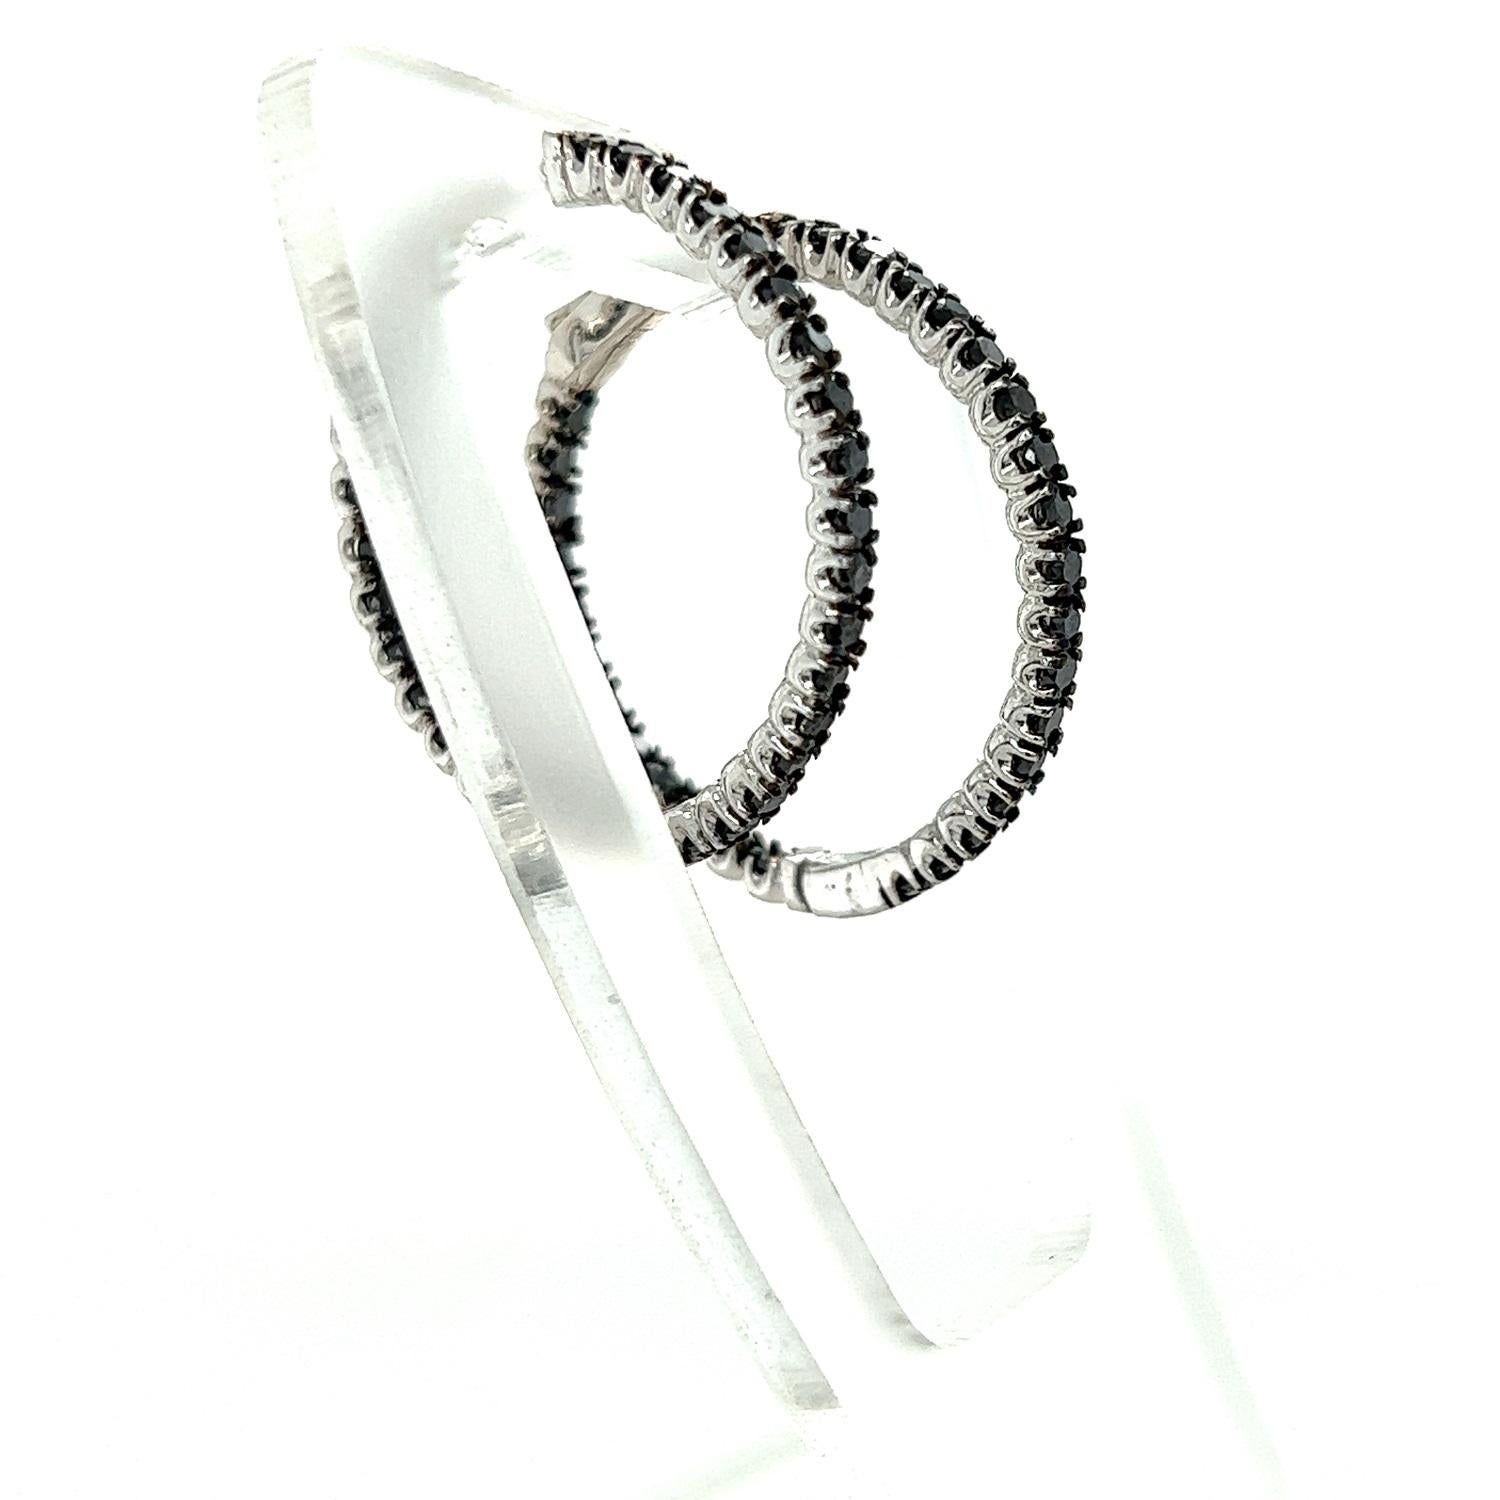 These hoop earrings have Natural Round Cut Black Diamonds that weigh 1.73 carats. 

They are set in 14 Karat White Gold and have an approximate gold weight of 5.8 grams.

The hoops are approximately 1 inches wide. 